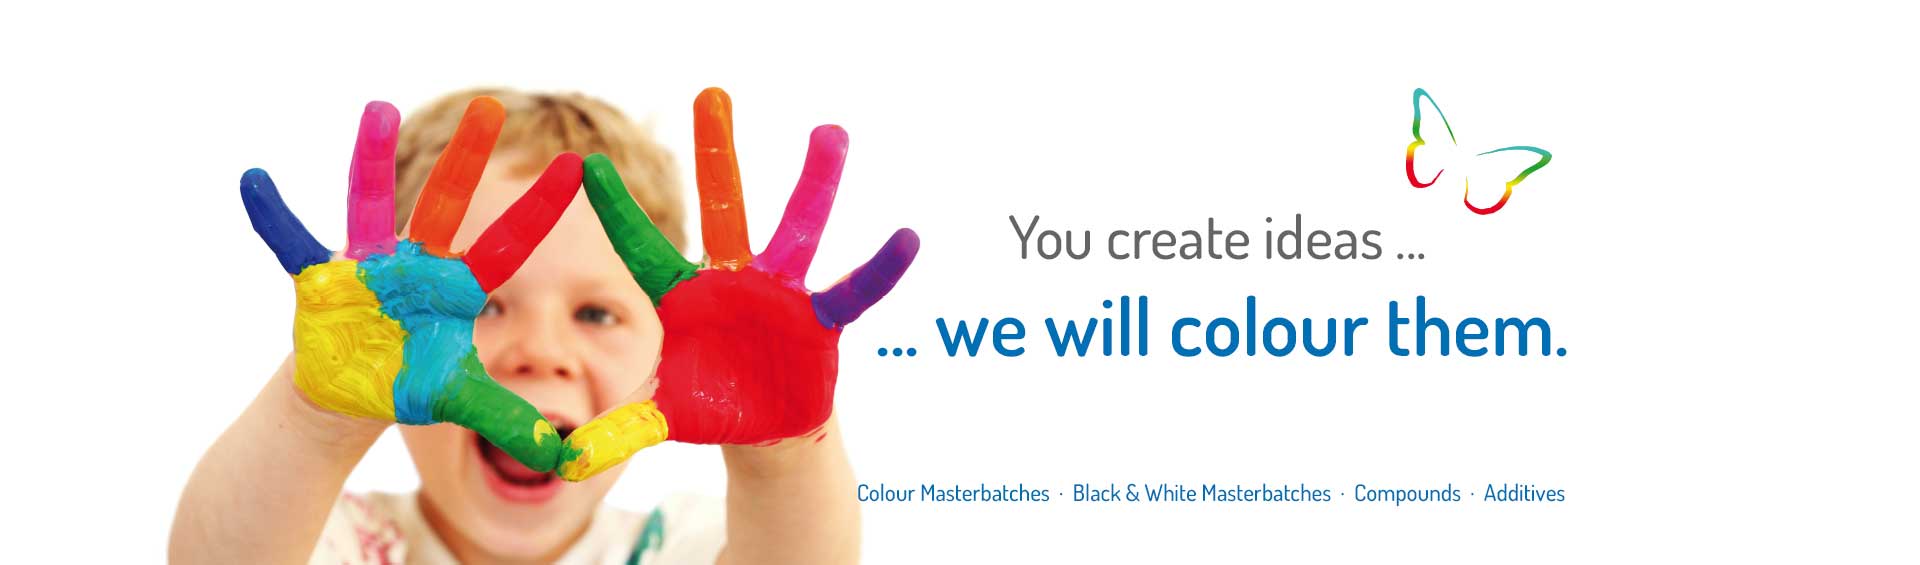 You create ideas ... we will colour them.